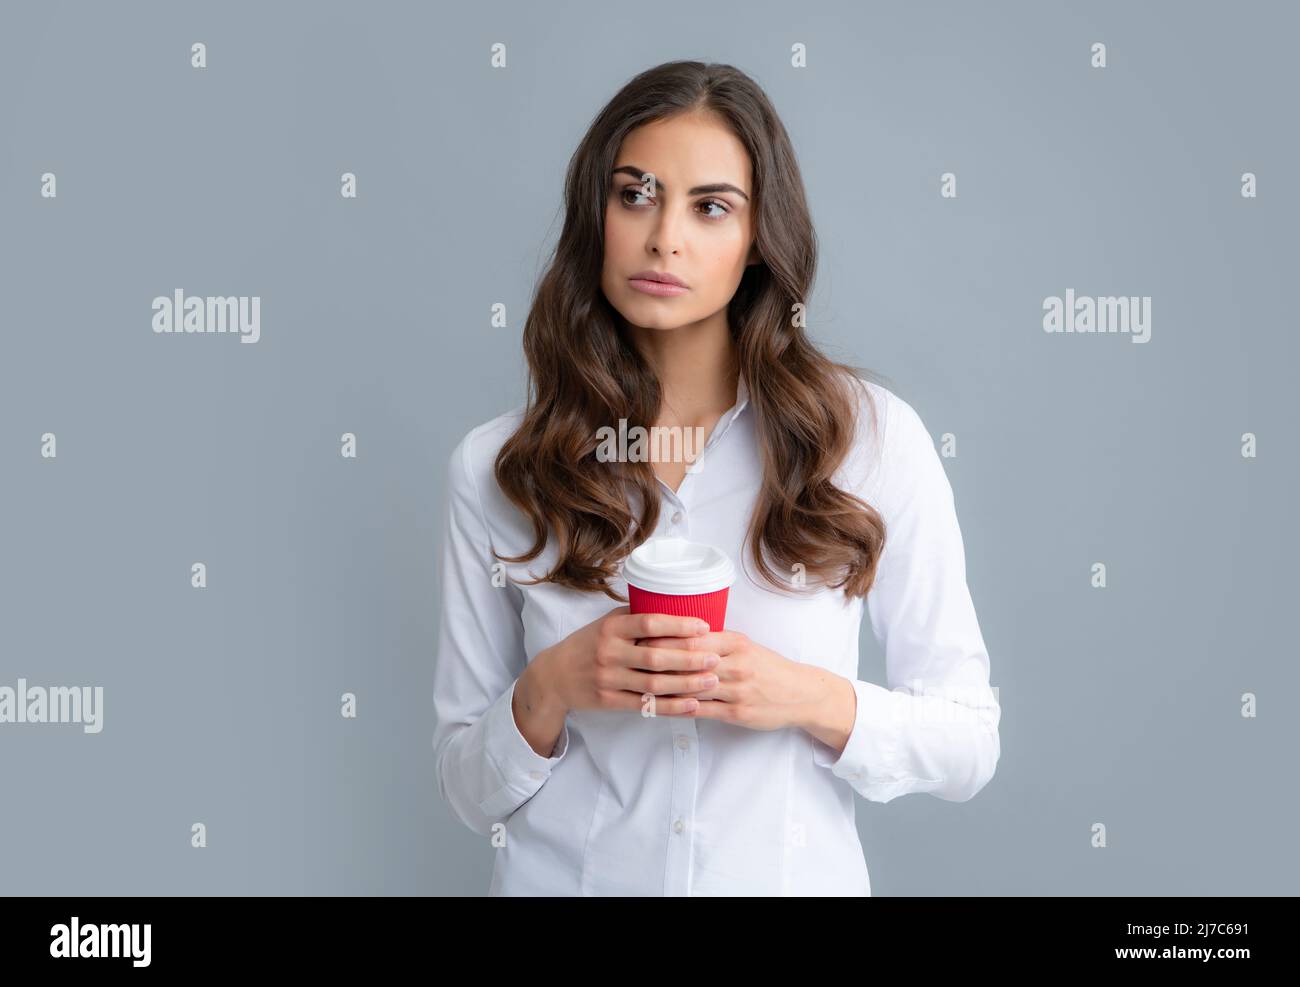 Portrait of nice cute girl holding cup of coffee. Young woman smiling with a coffee cup, isolated on gray background. Stock Photo